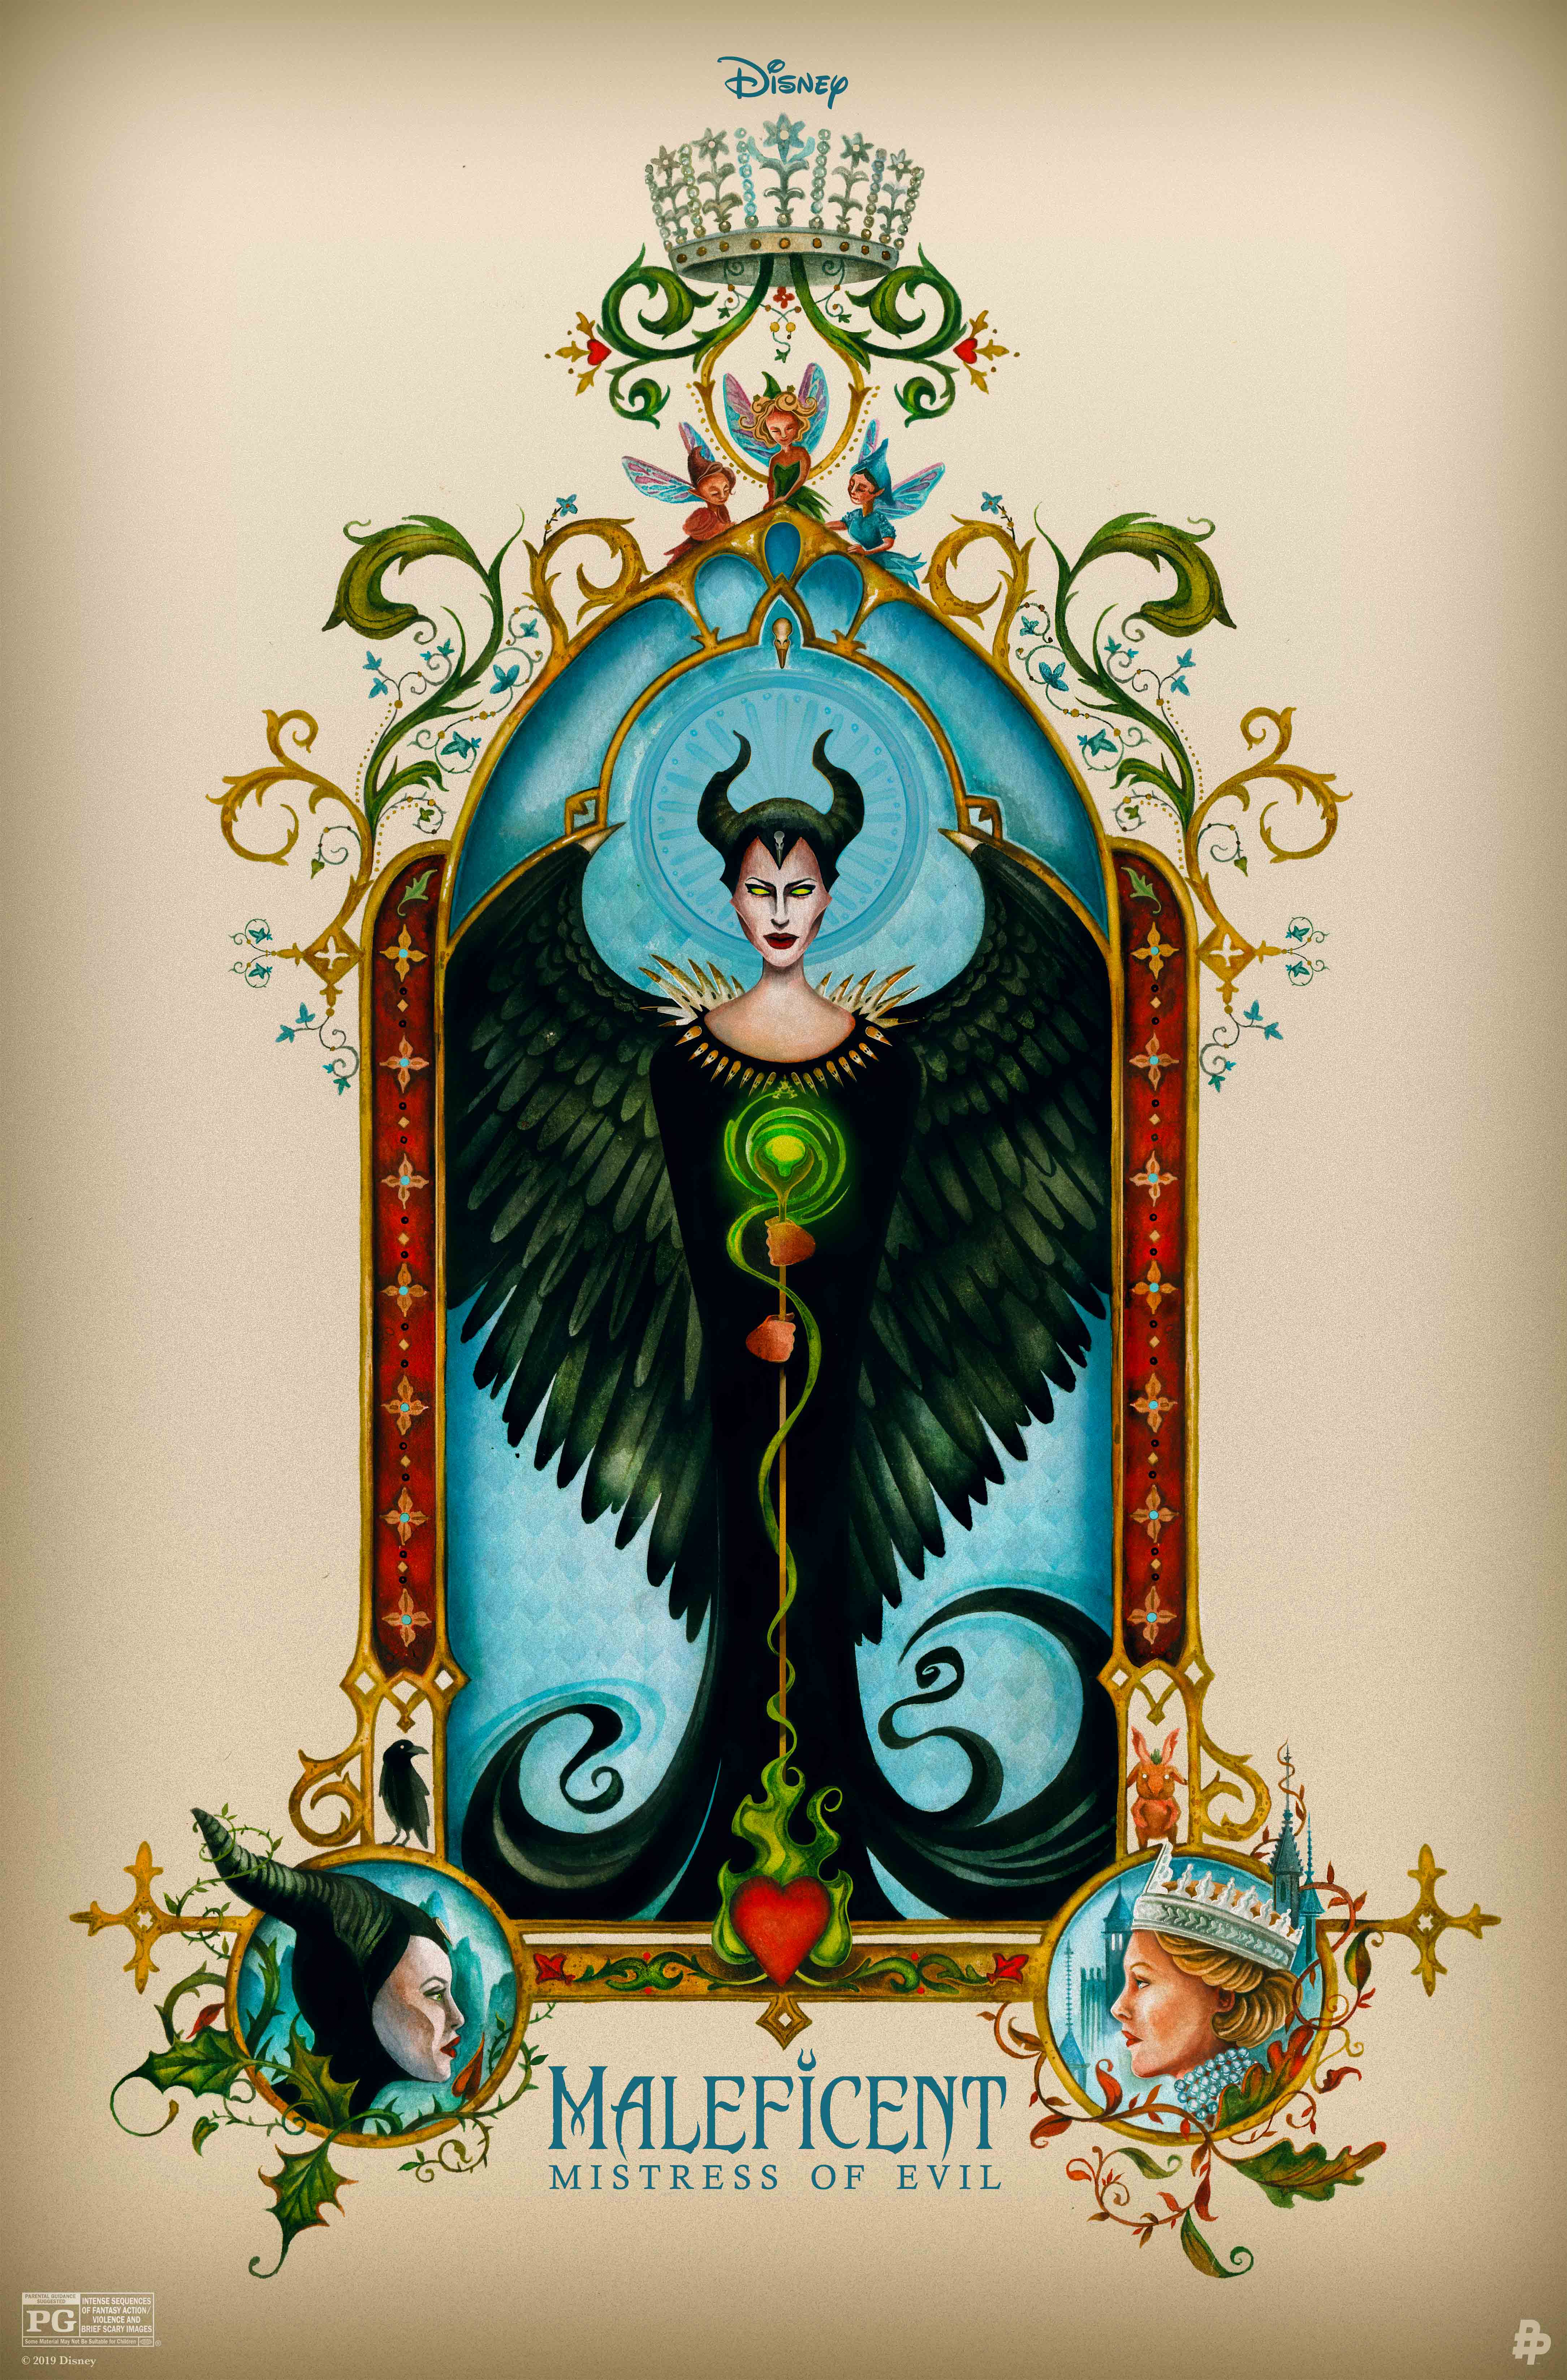 Artwork by Maleficent: Mistress of Evil